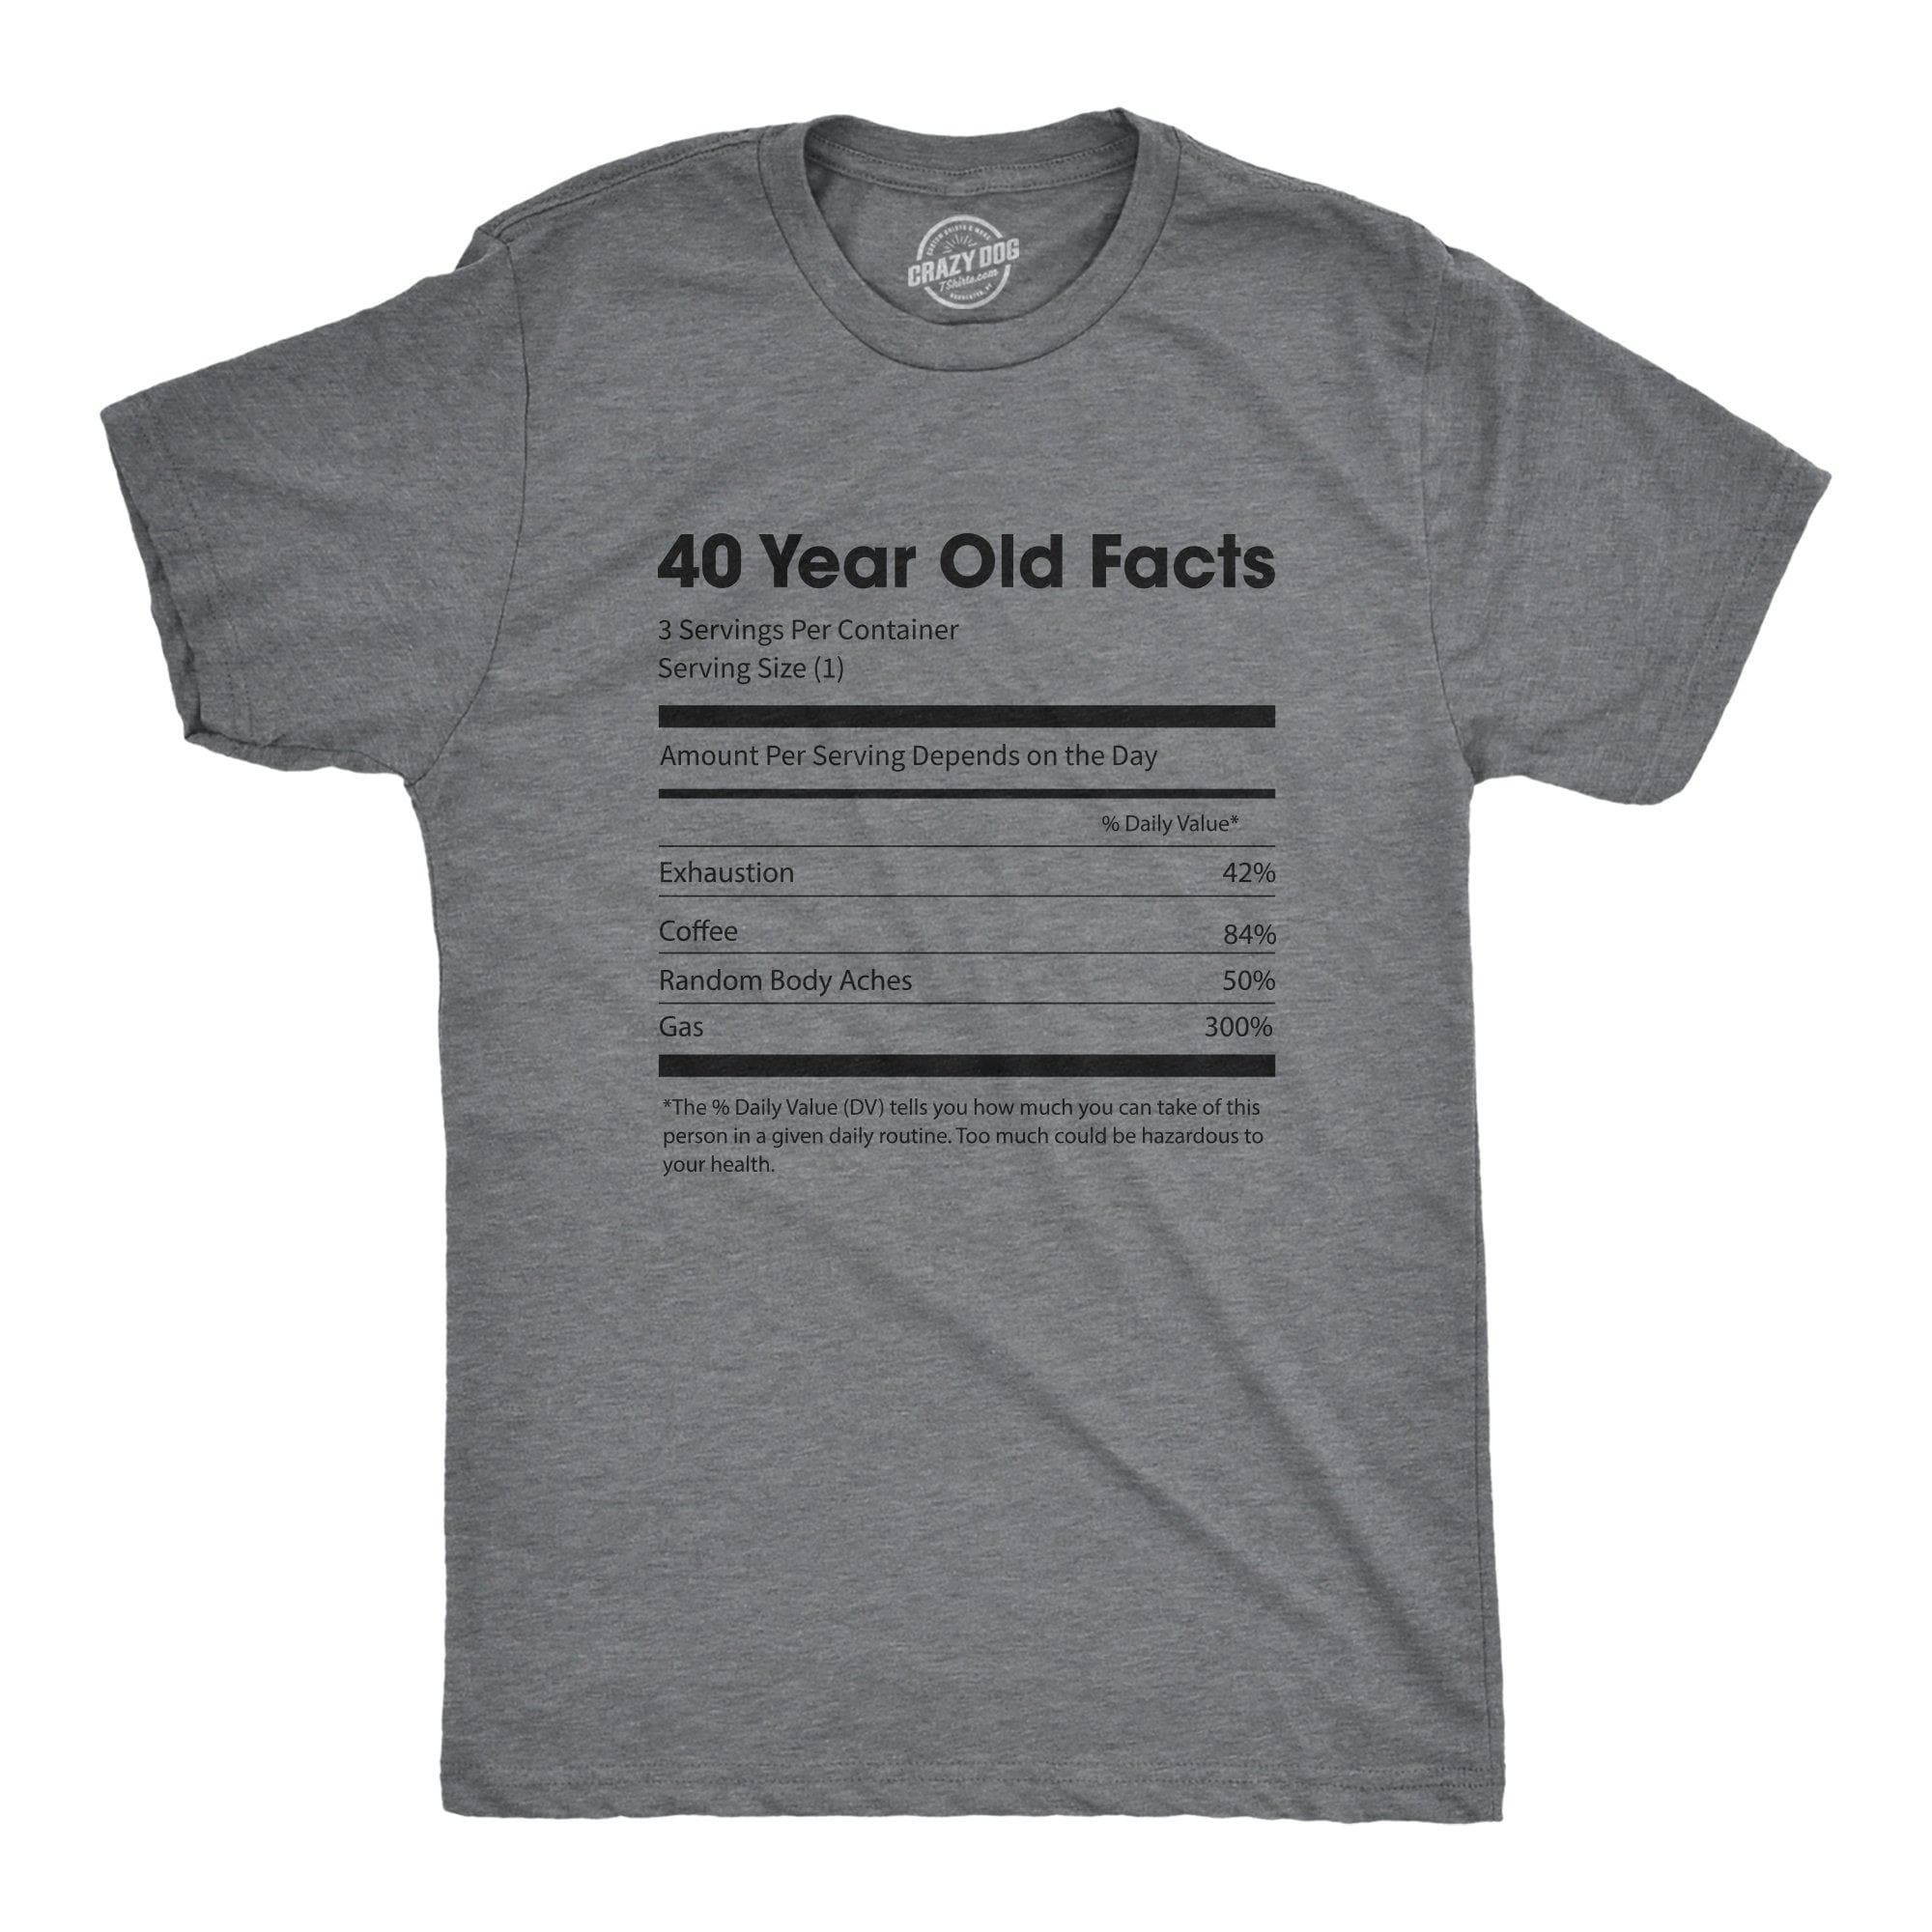 40 Year Old Facts Men's Tshirt - Crazy Dog T-Shirts